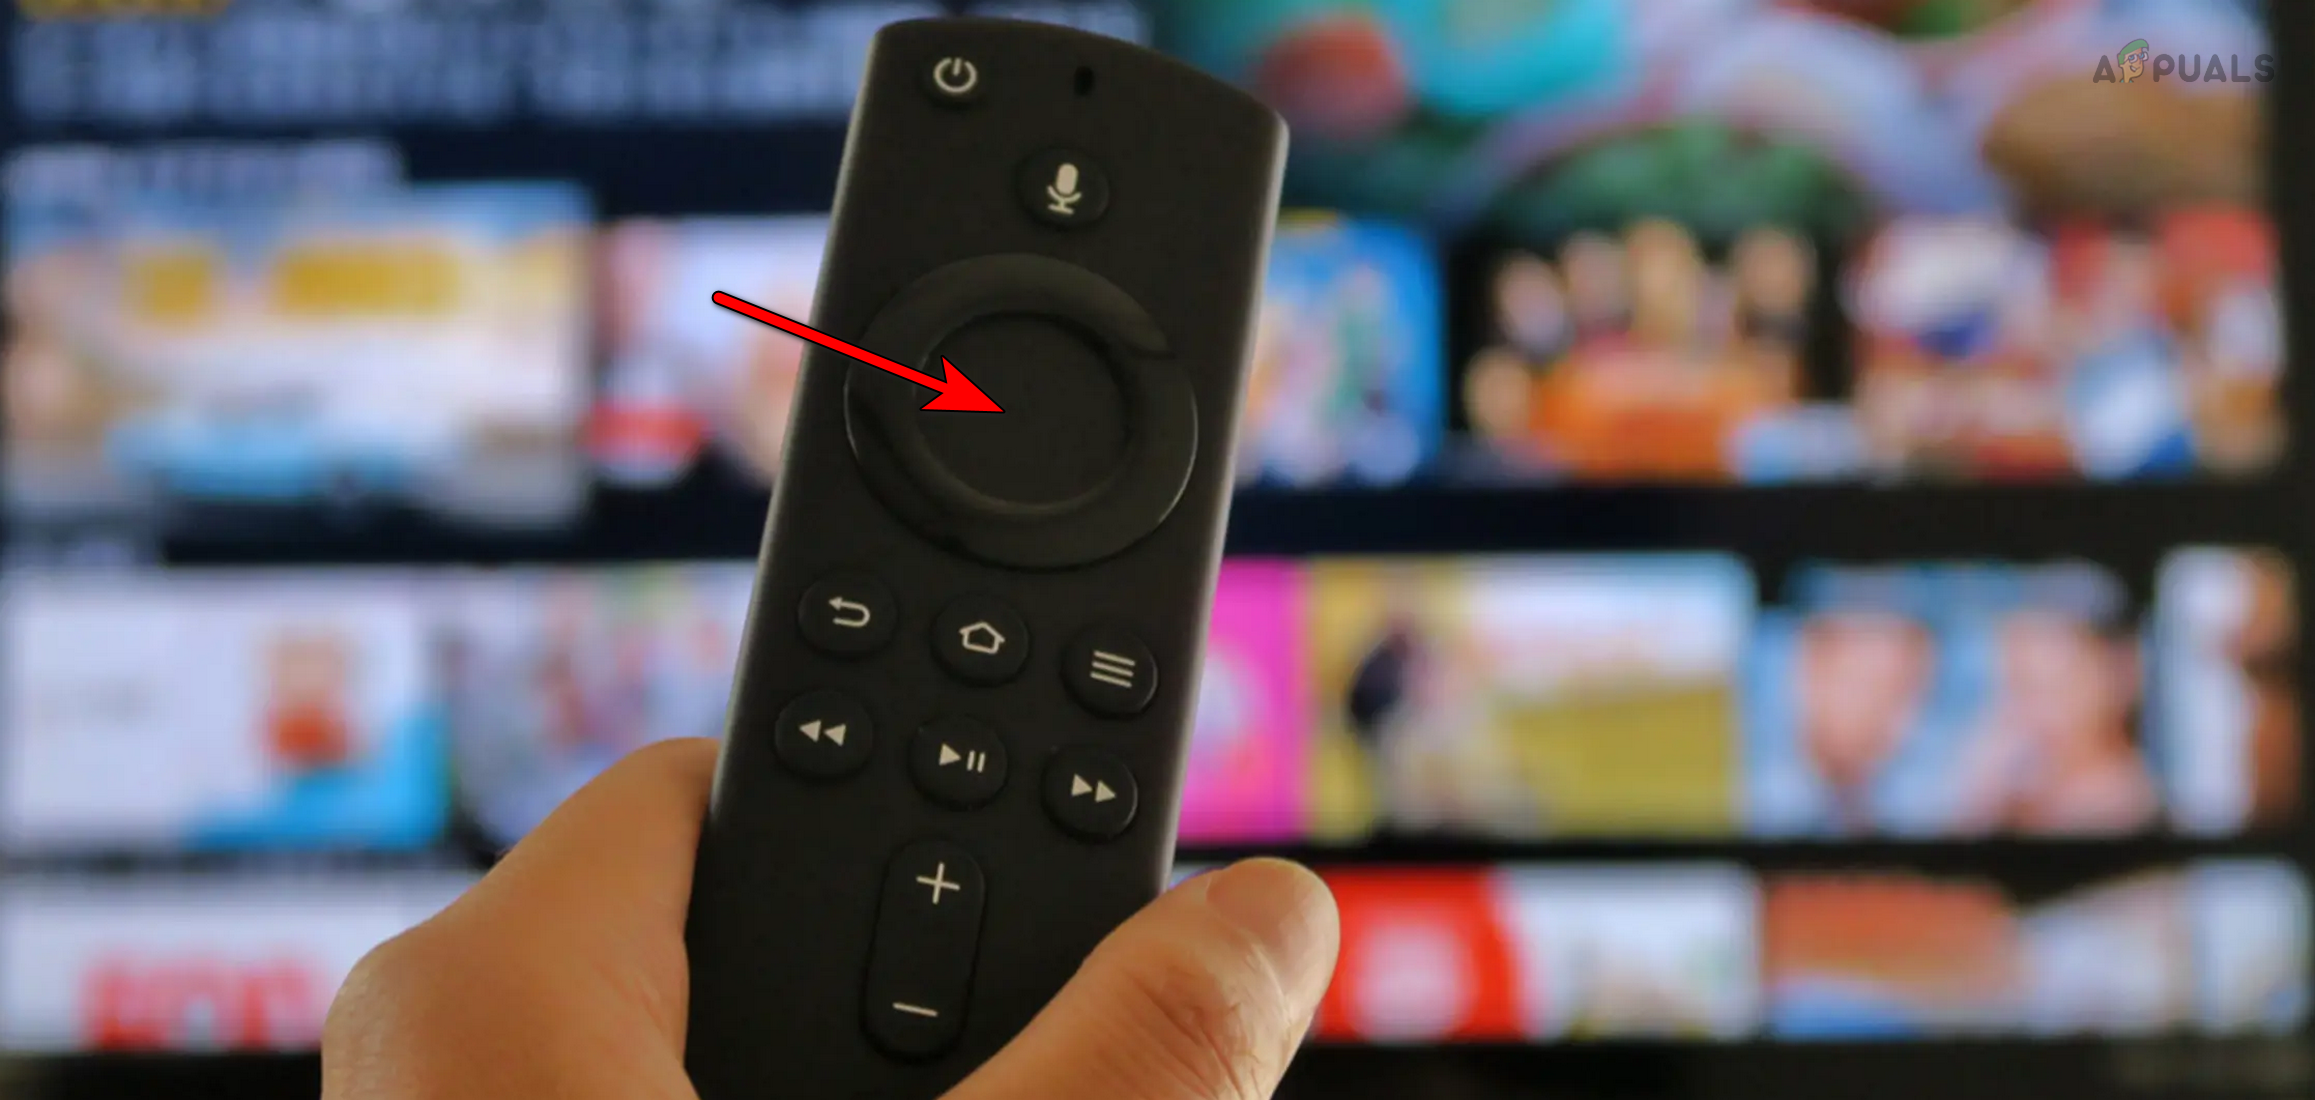 Press and hold the Select Button on the Firestick Remote